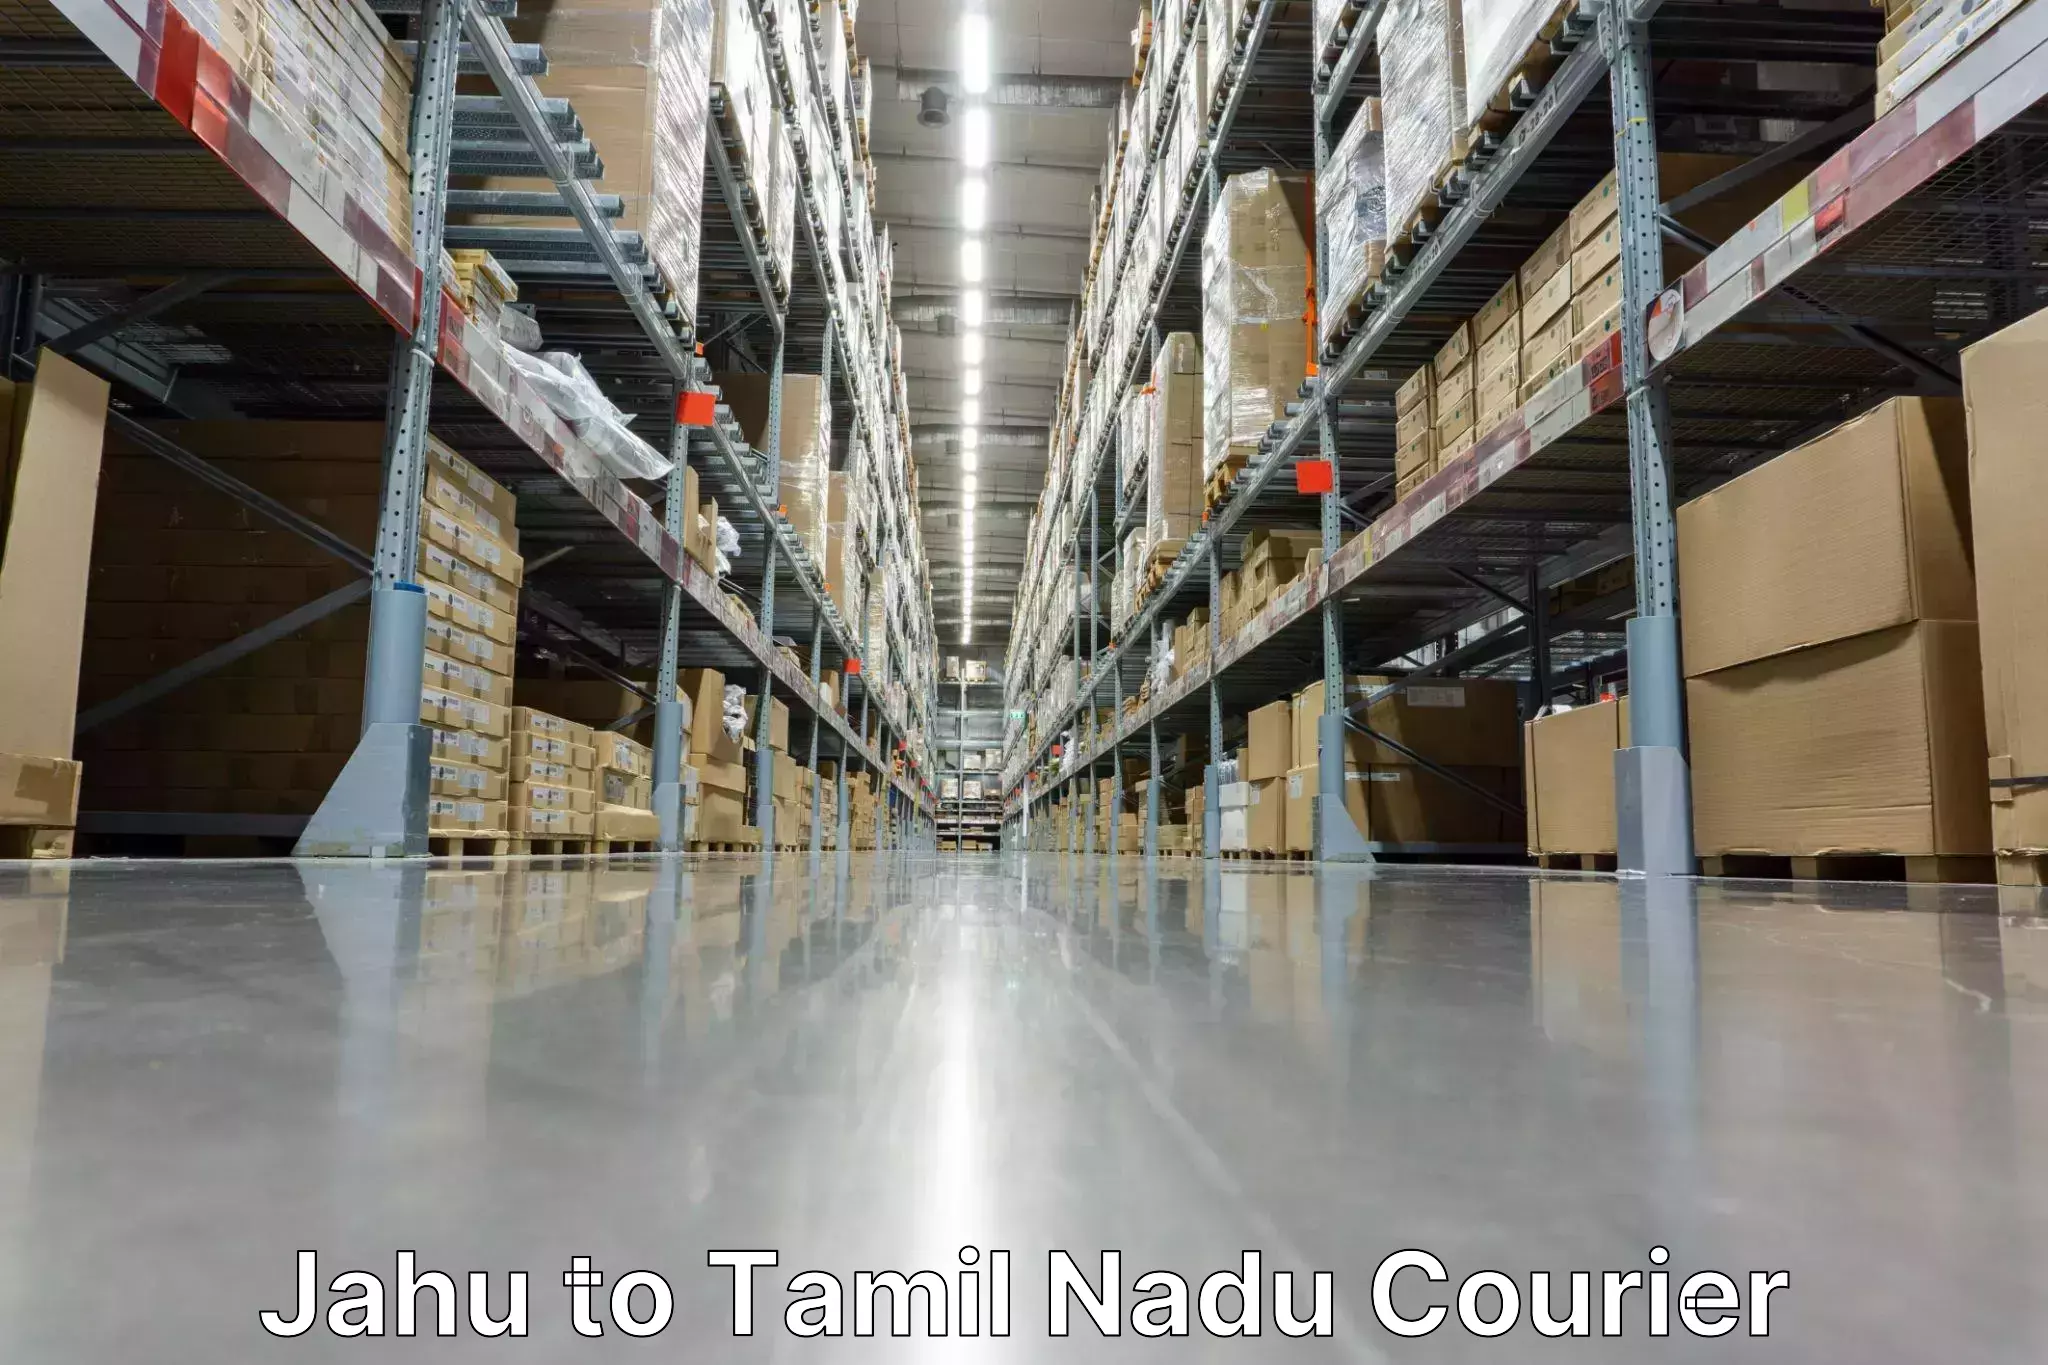 Courier services Jahu to Ennore Port Chennai